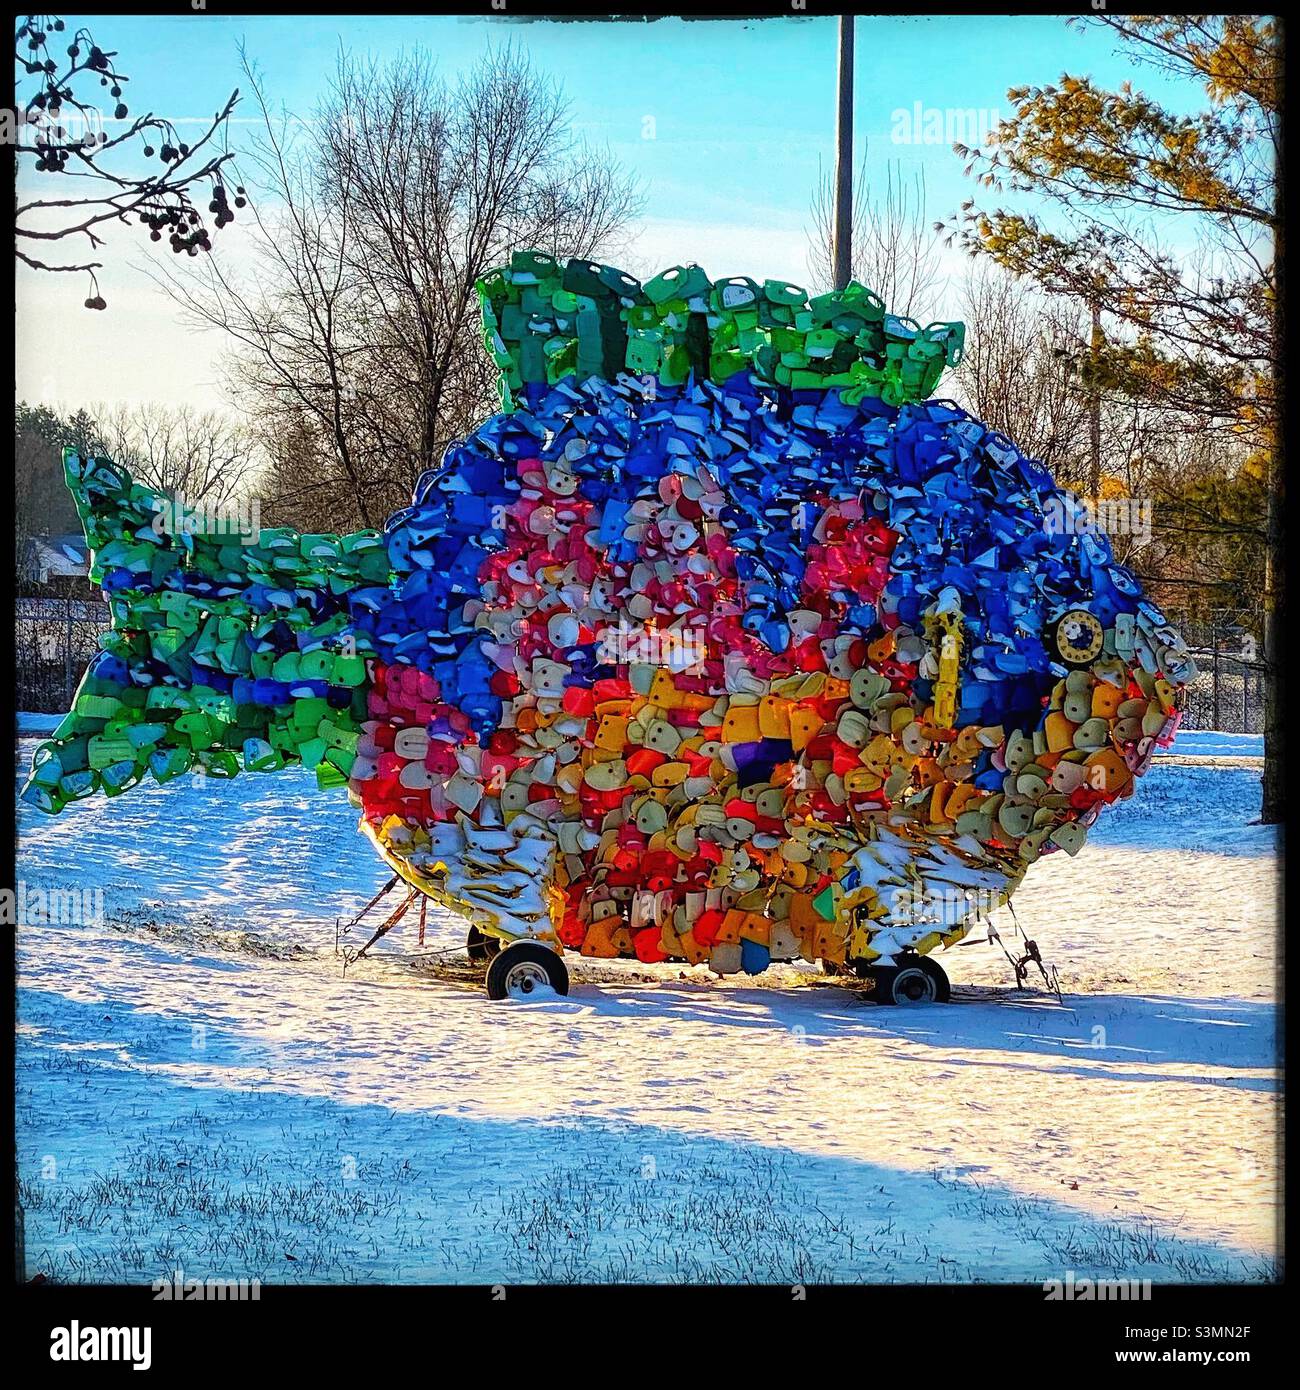 Huge colorful fish made from recycled materials Stock Photo